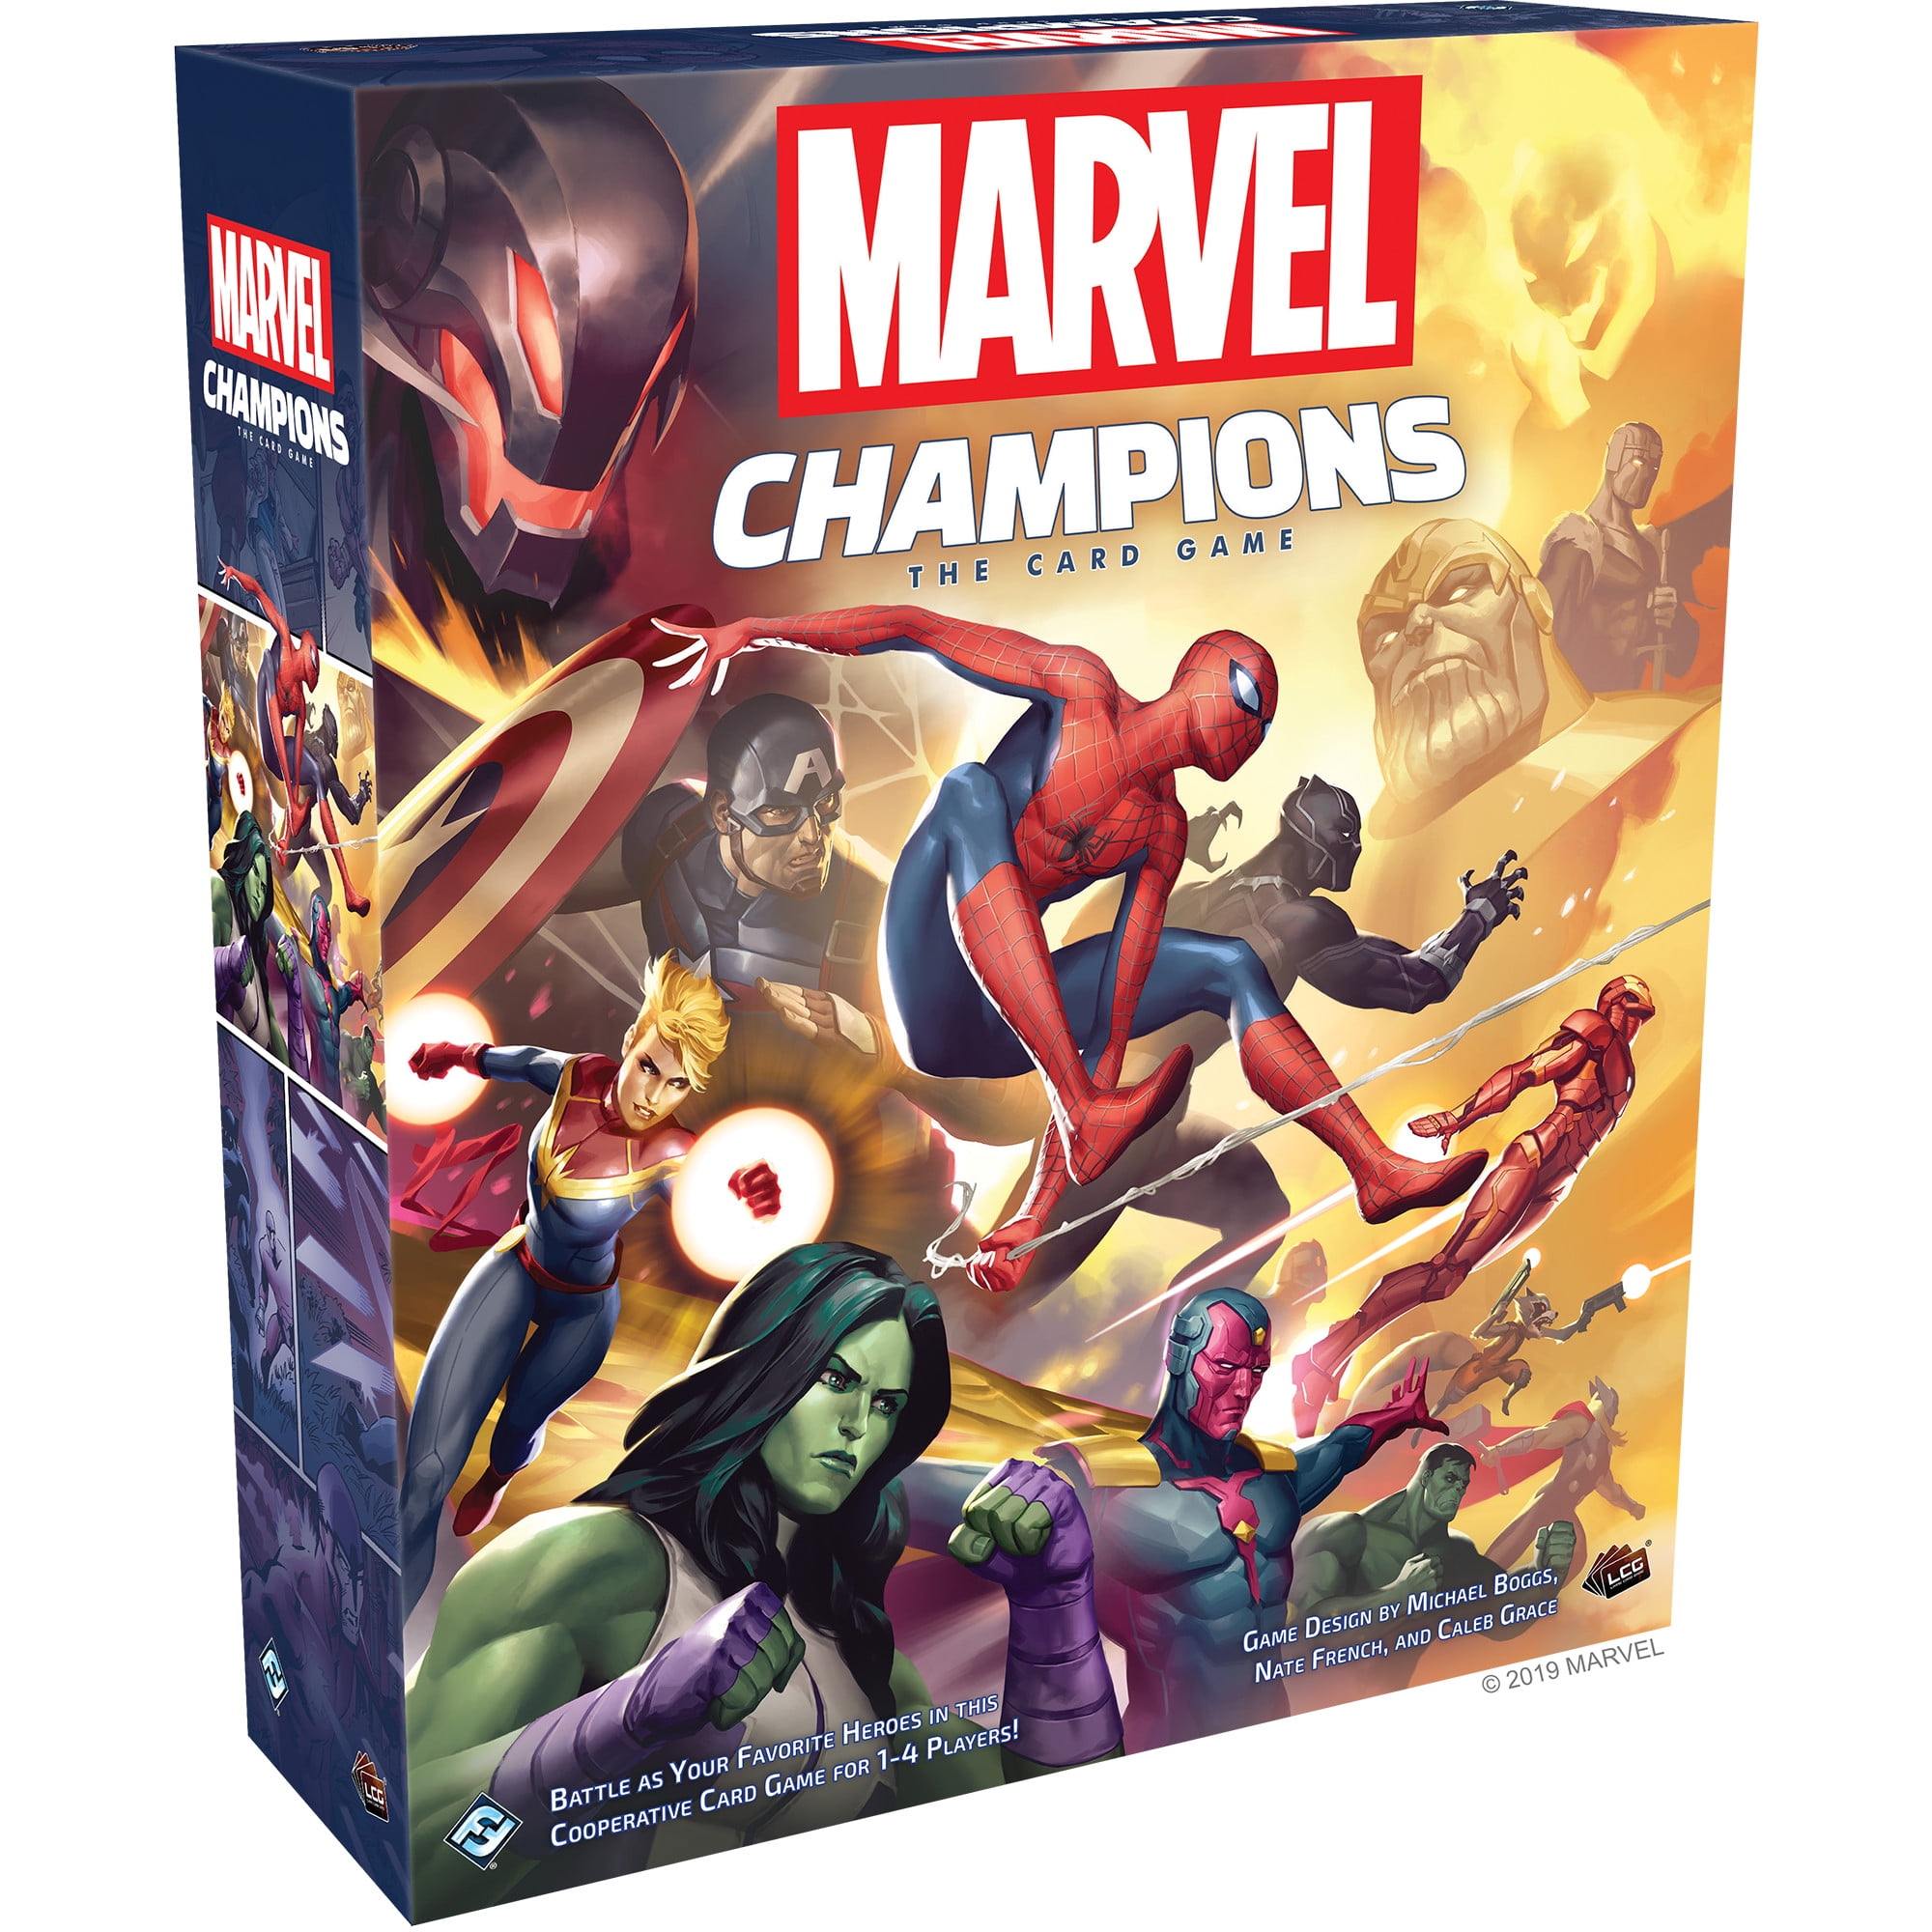 3-4 Player Token and Storage for Marvel Champions 